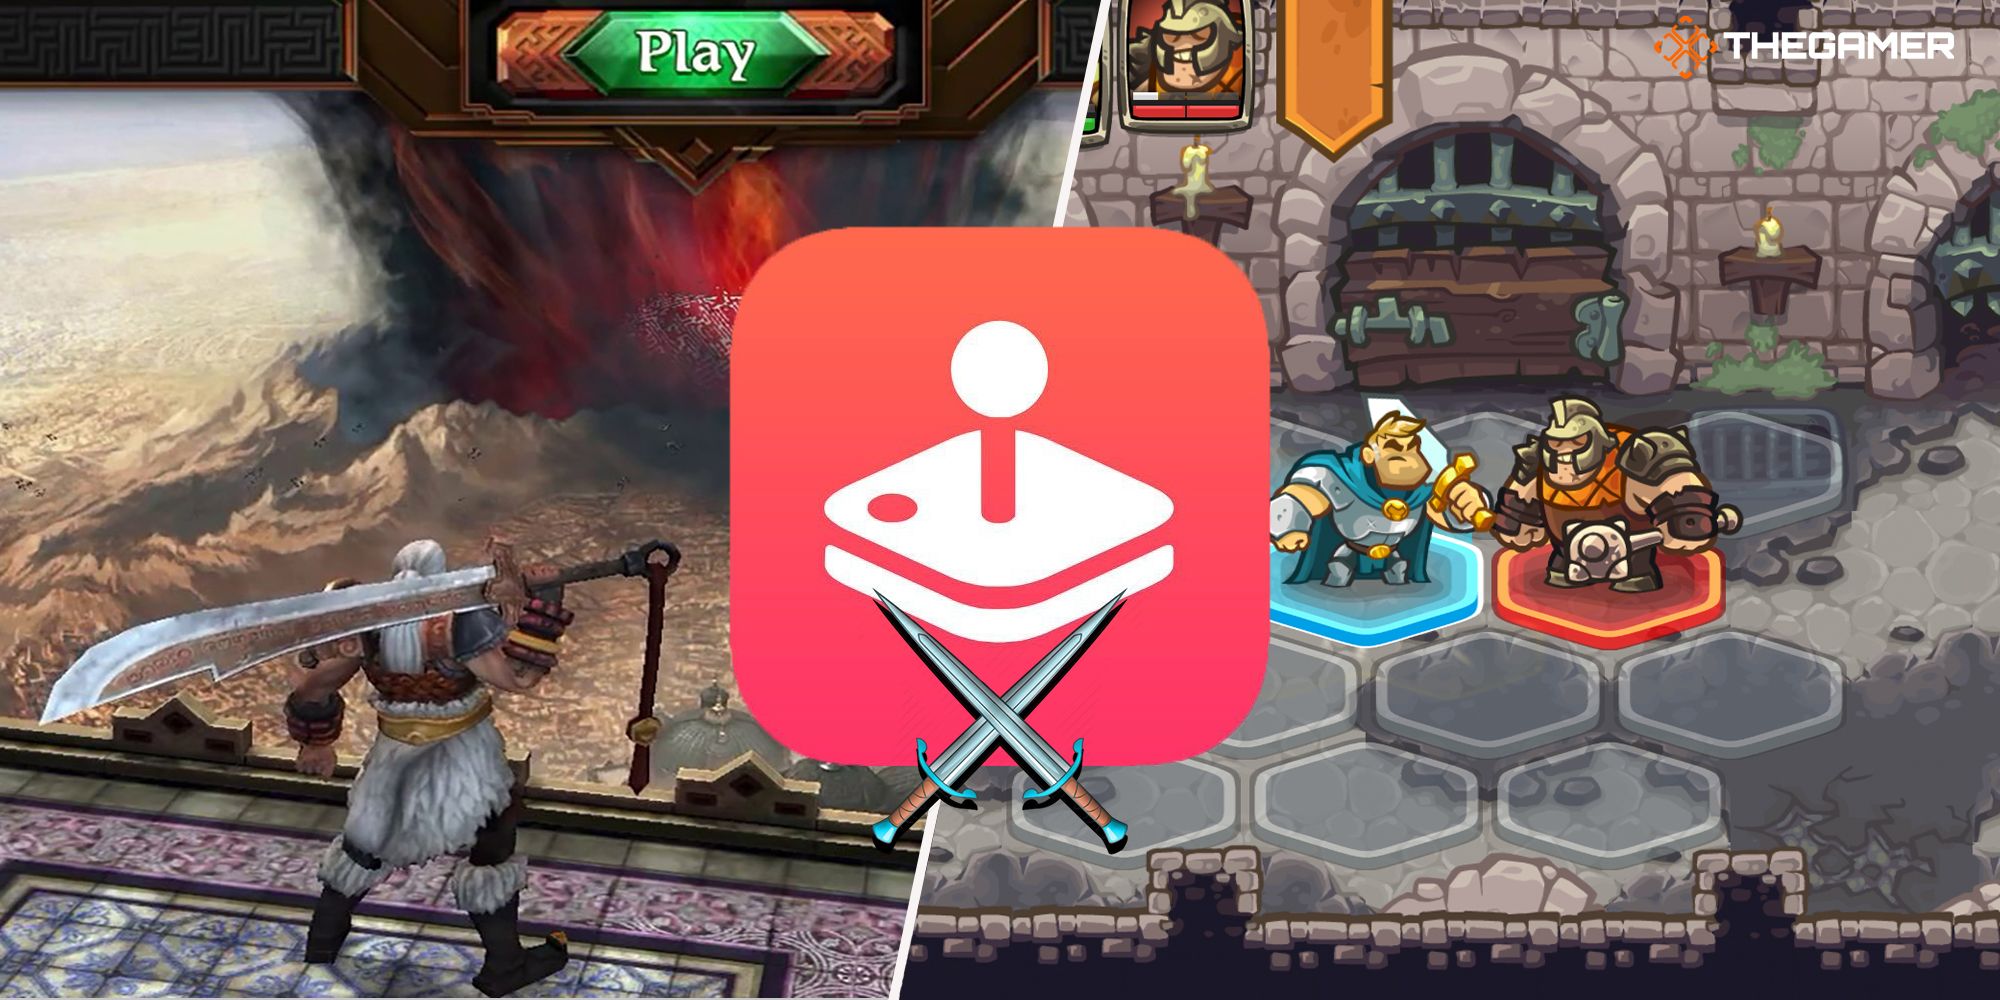 Images from Spelldrifter and Legends of Kingdom Rush, centered with the Apple Arcade logo and a pair of blades.